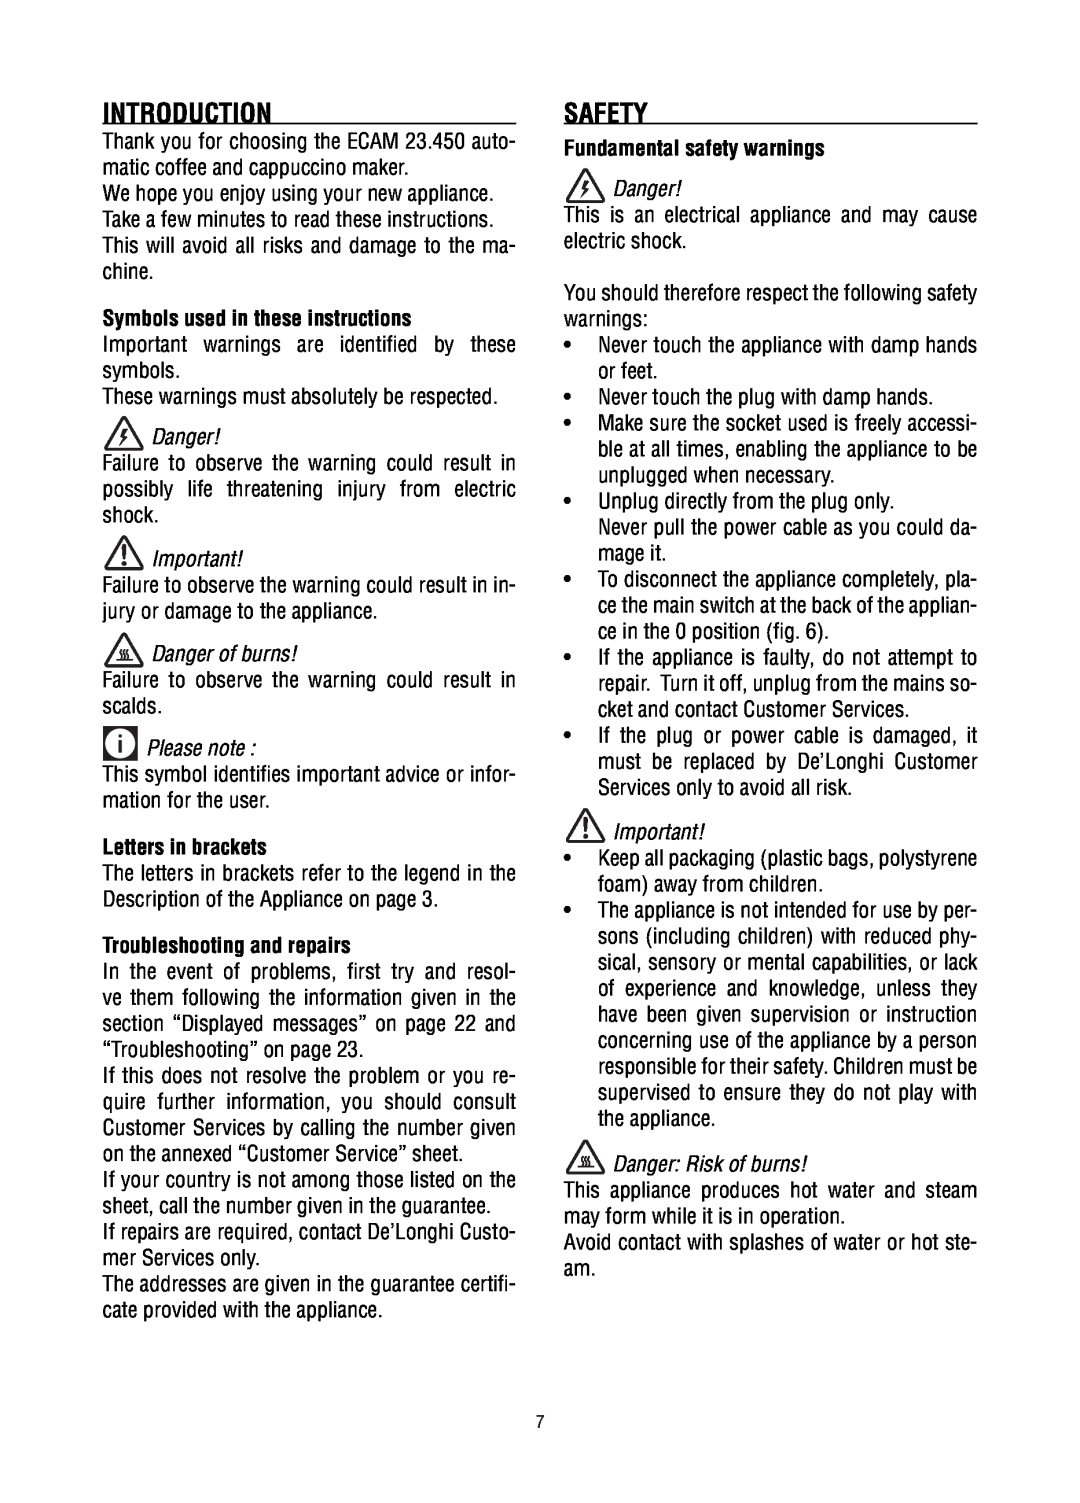 DeLonghi ECAM23.450 manual Introduction, Safety, Symbols used in these instructions, Letters in brackets 